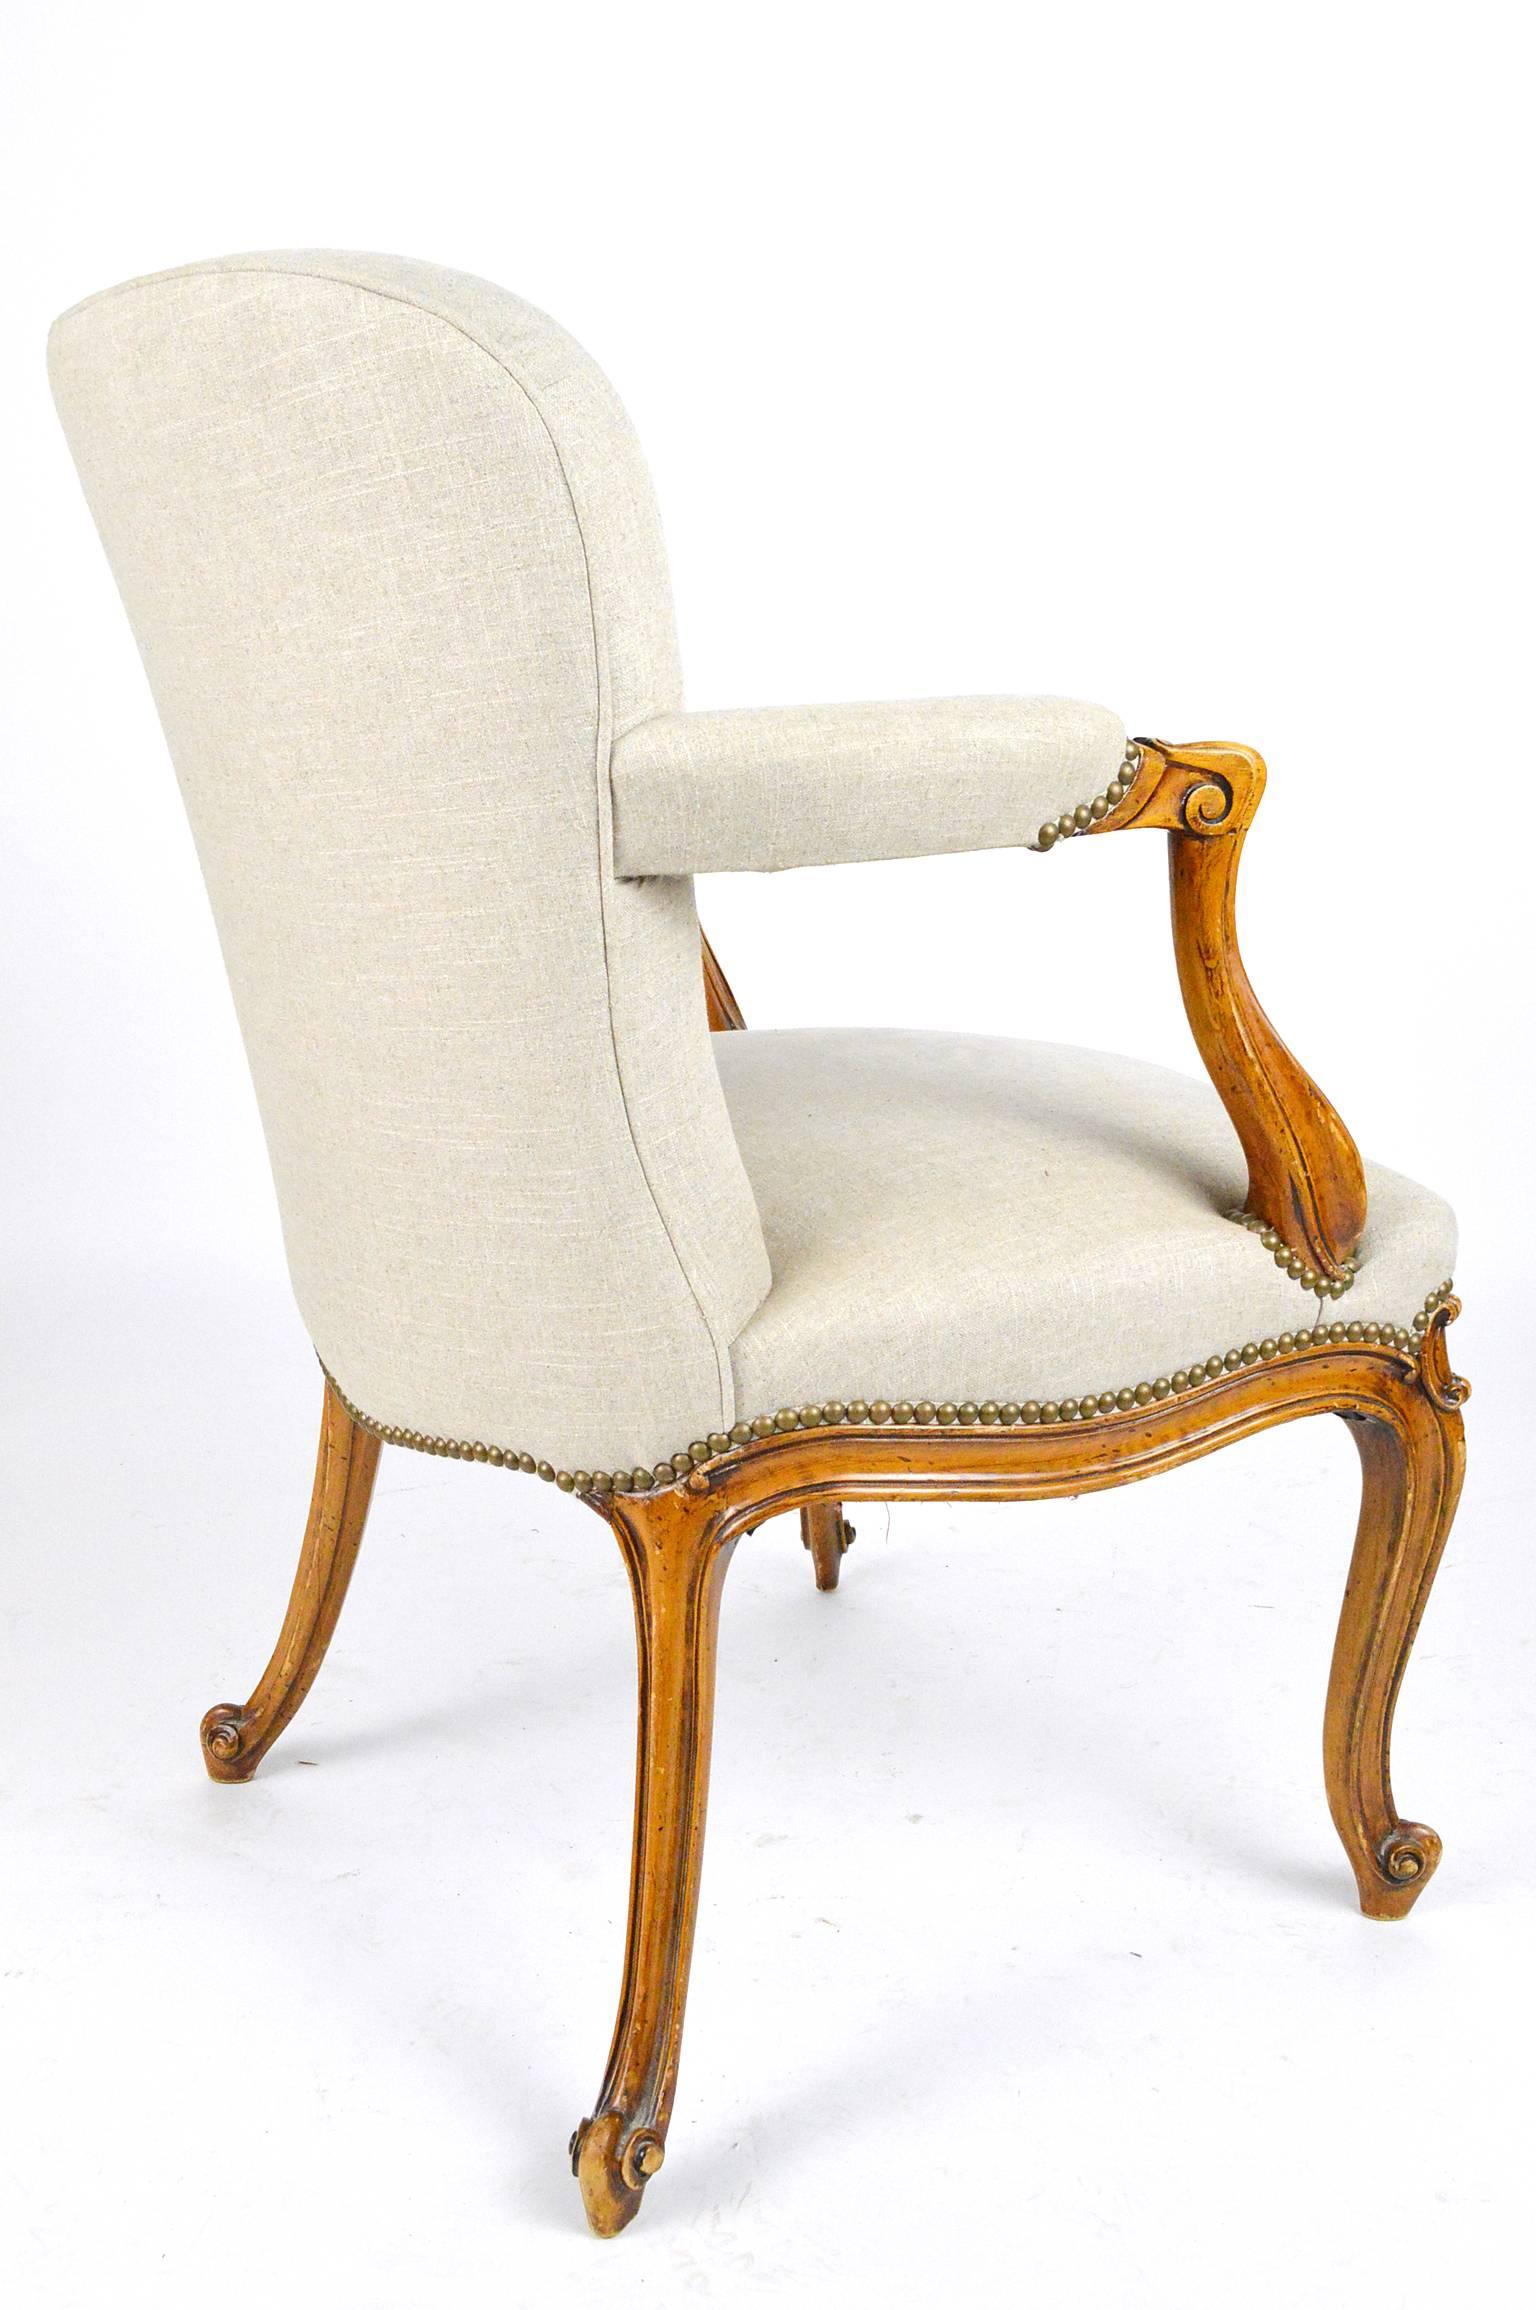 19th Century French Regency Style Carved Open Armchair In Good Condition For Sale In Atlanta, GA